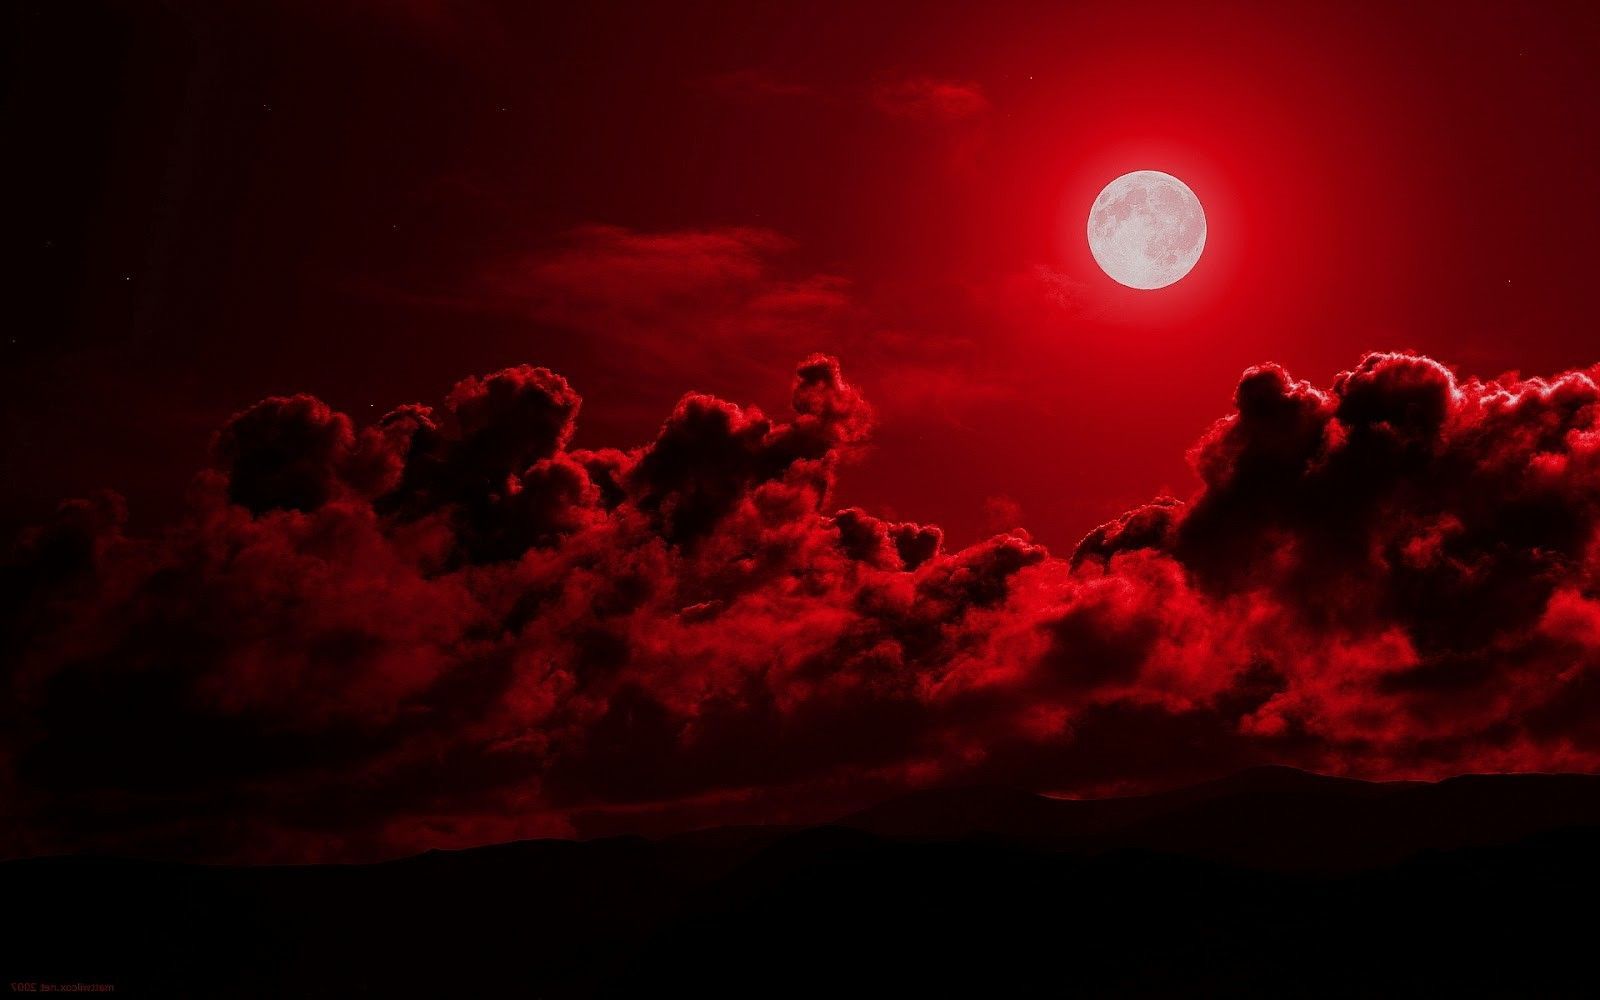 Beatiful Red Solar Eclipse From Today 8 21 17. Black And White Clouds, Black Aesthetic Wallpaper, Black And White Background